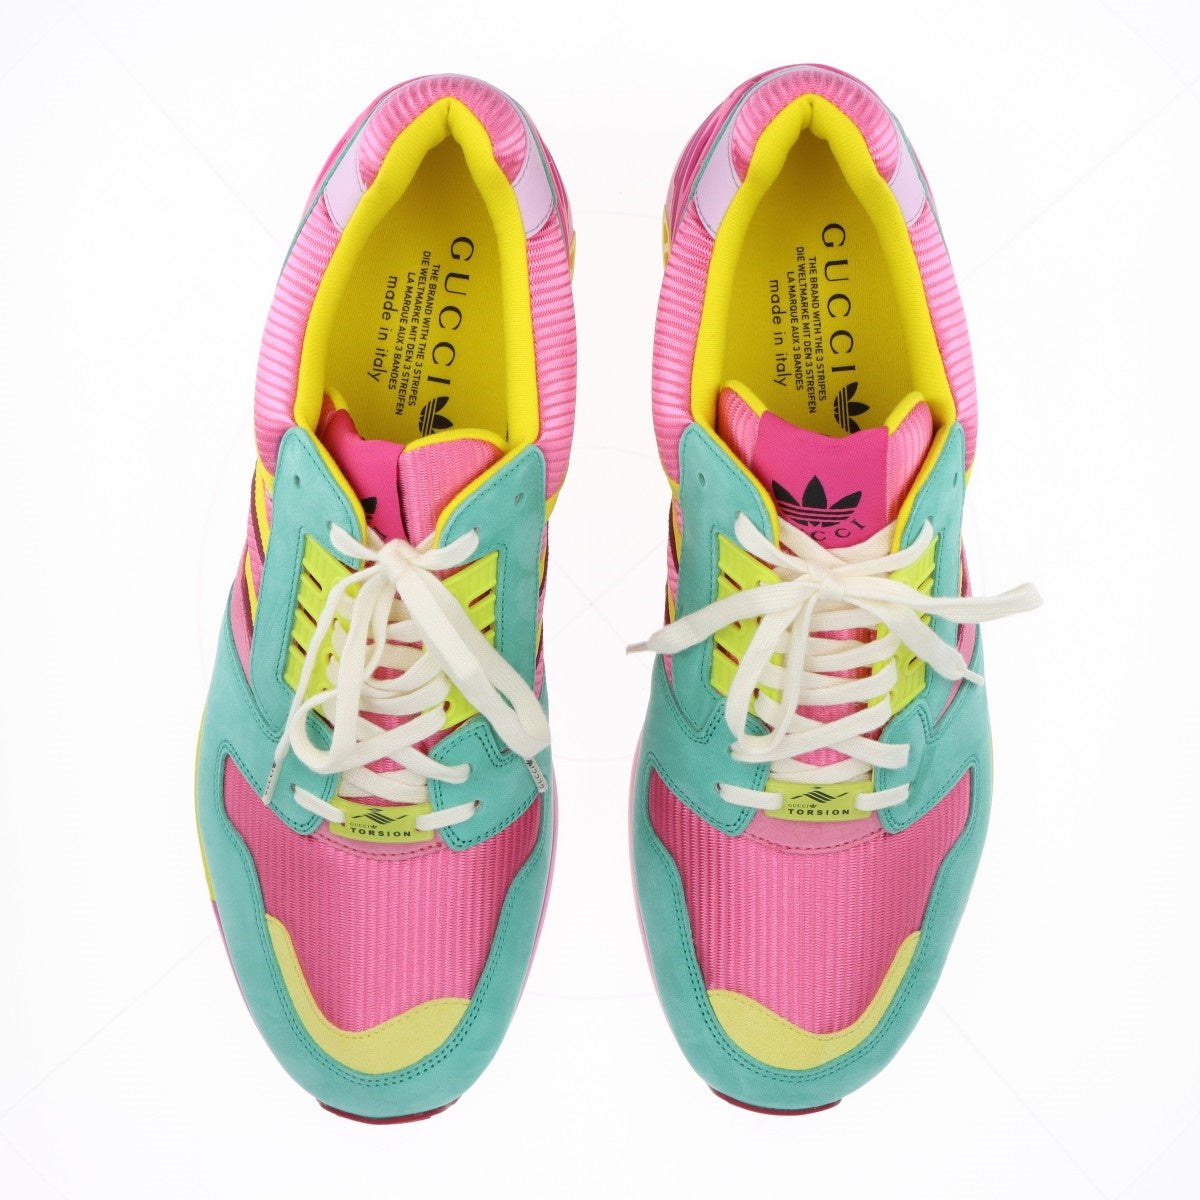 Gucci x Adidas ZX8000 Fabric sneakers Multicolor 721936